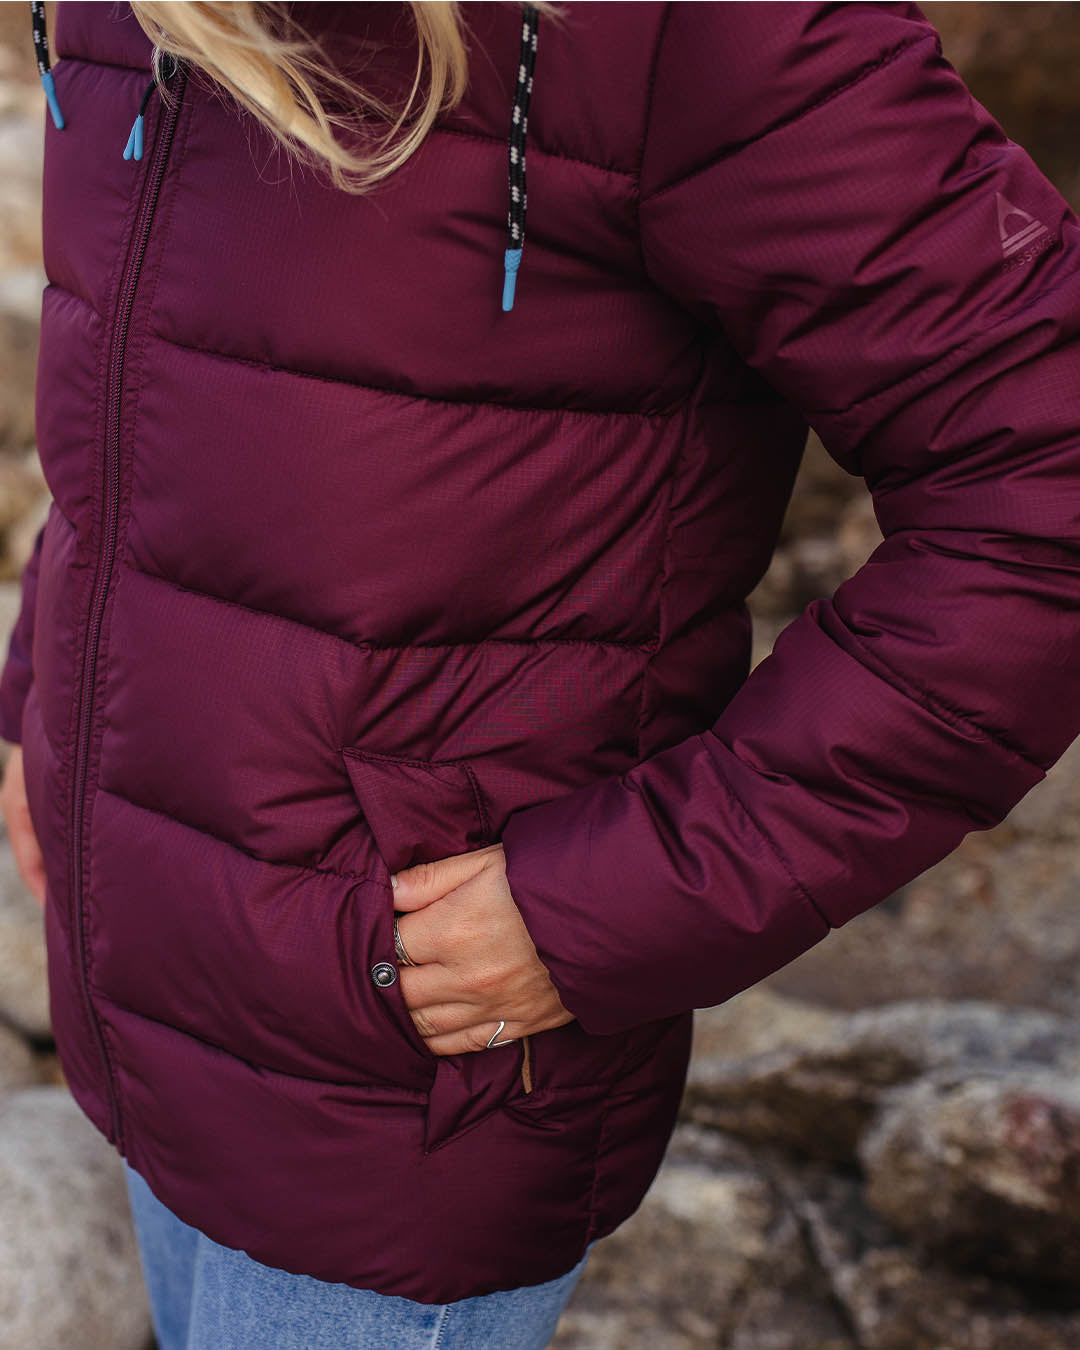 Parks Recycled Insulated Jacket - Windsor Wine